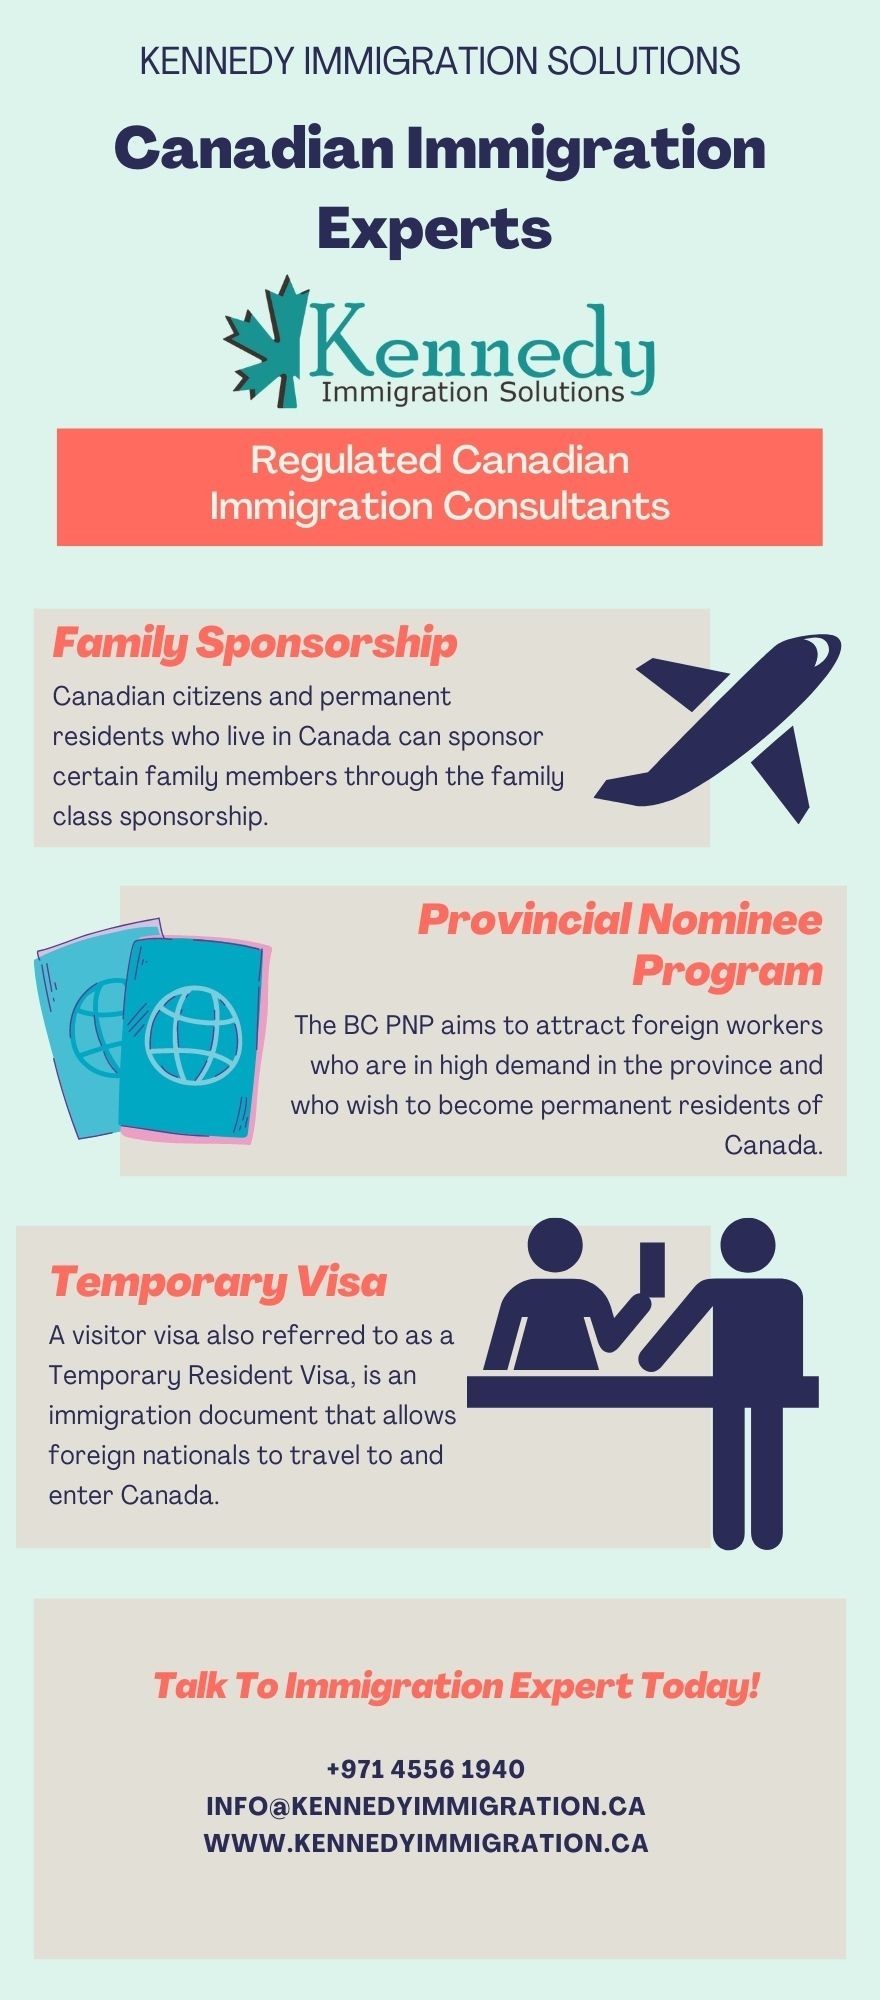 Canadian Immigration Experts – Kennedy Immigration Solutions